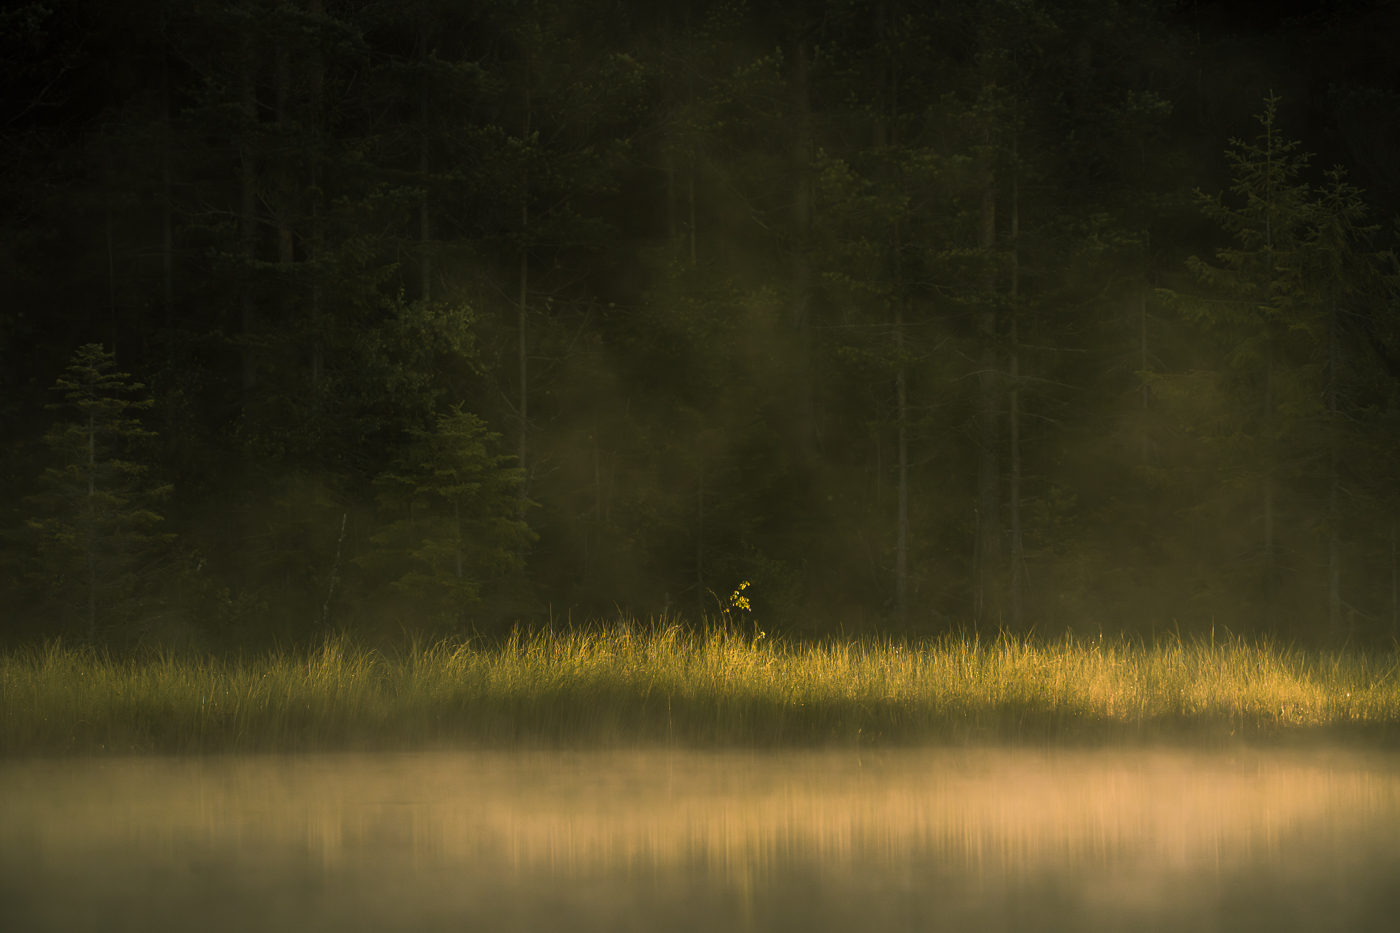 A warm sunlight illuminates grass strands by the shore of a misty lake in Sweden on a summer dawn